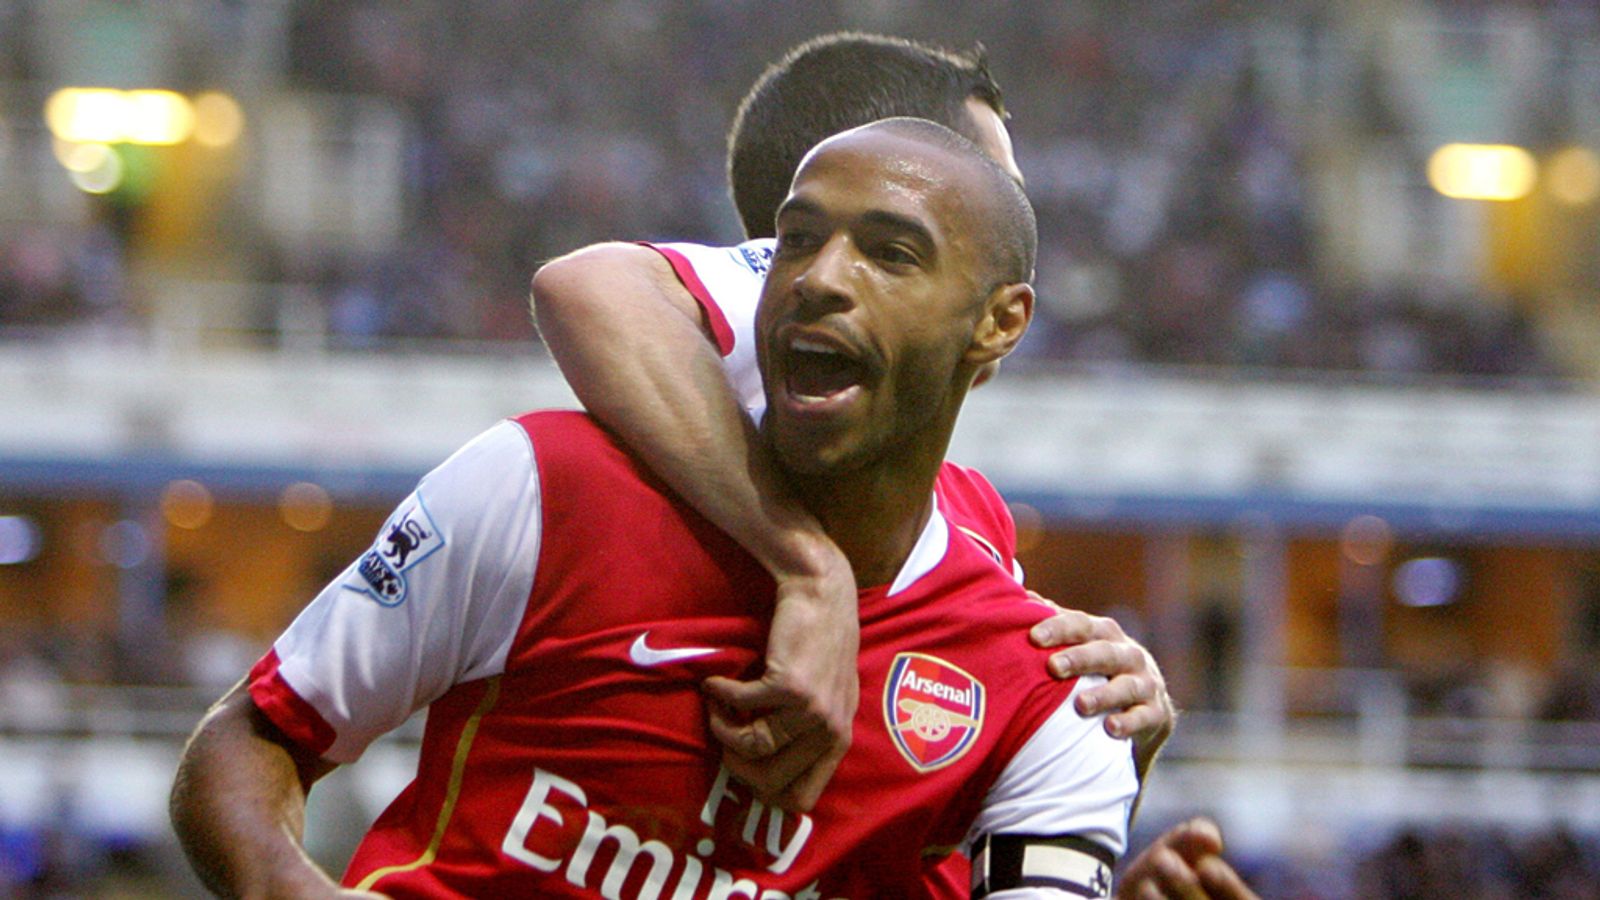 The sky's the limit' – Thierry Henry raves about PSG wonderkid and